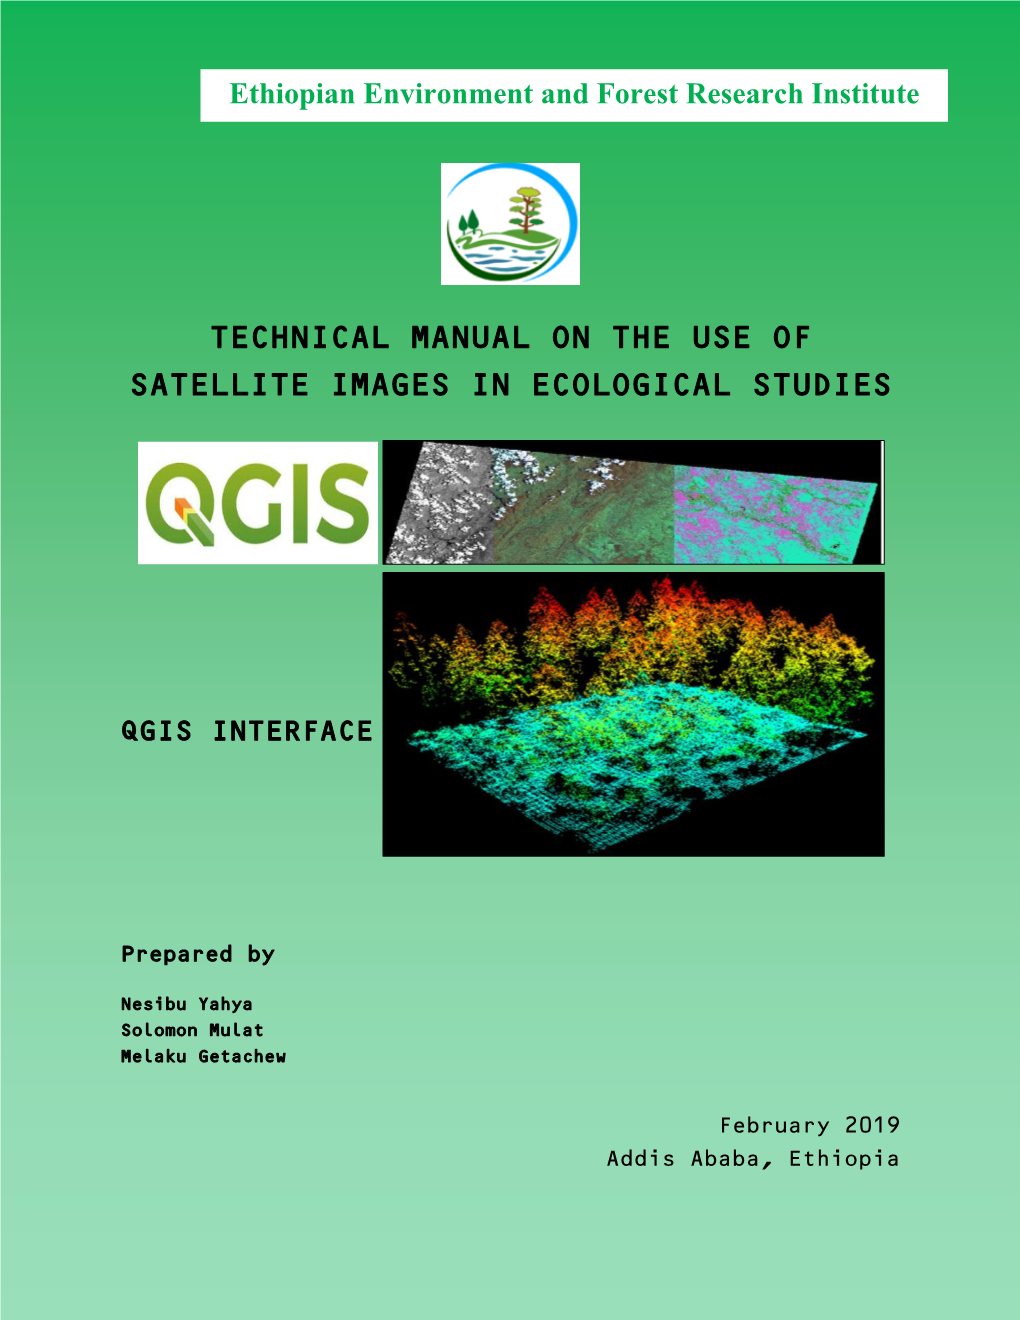 Technical Manual on the Use of Satellite Images in Ecological Studies